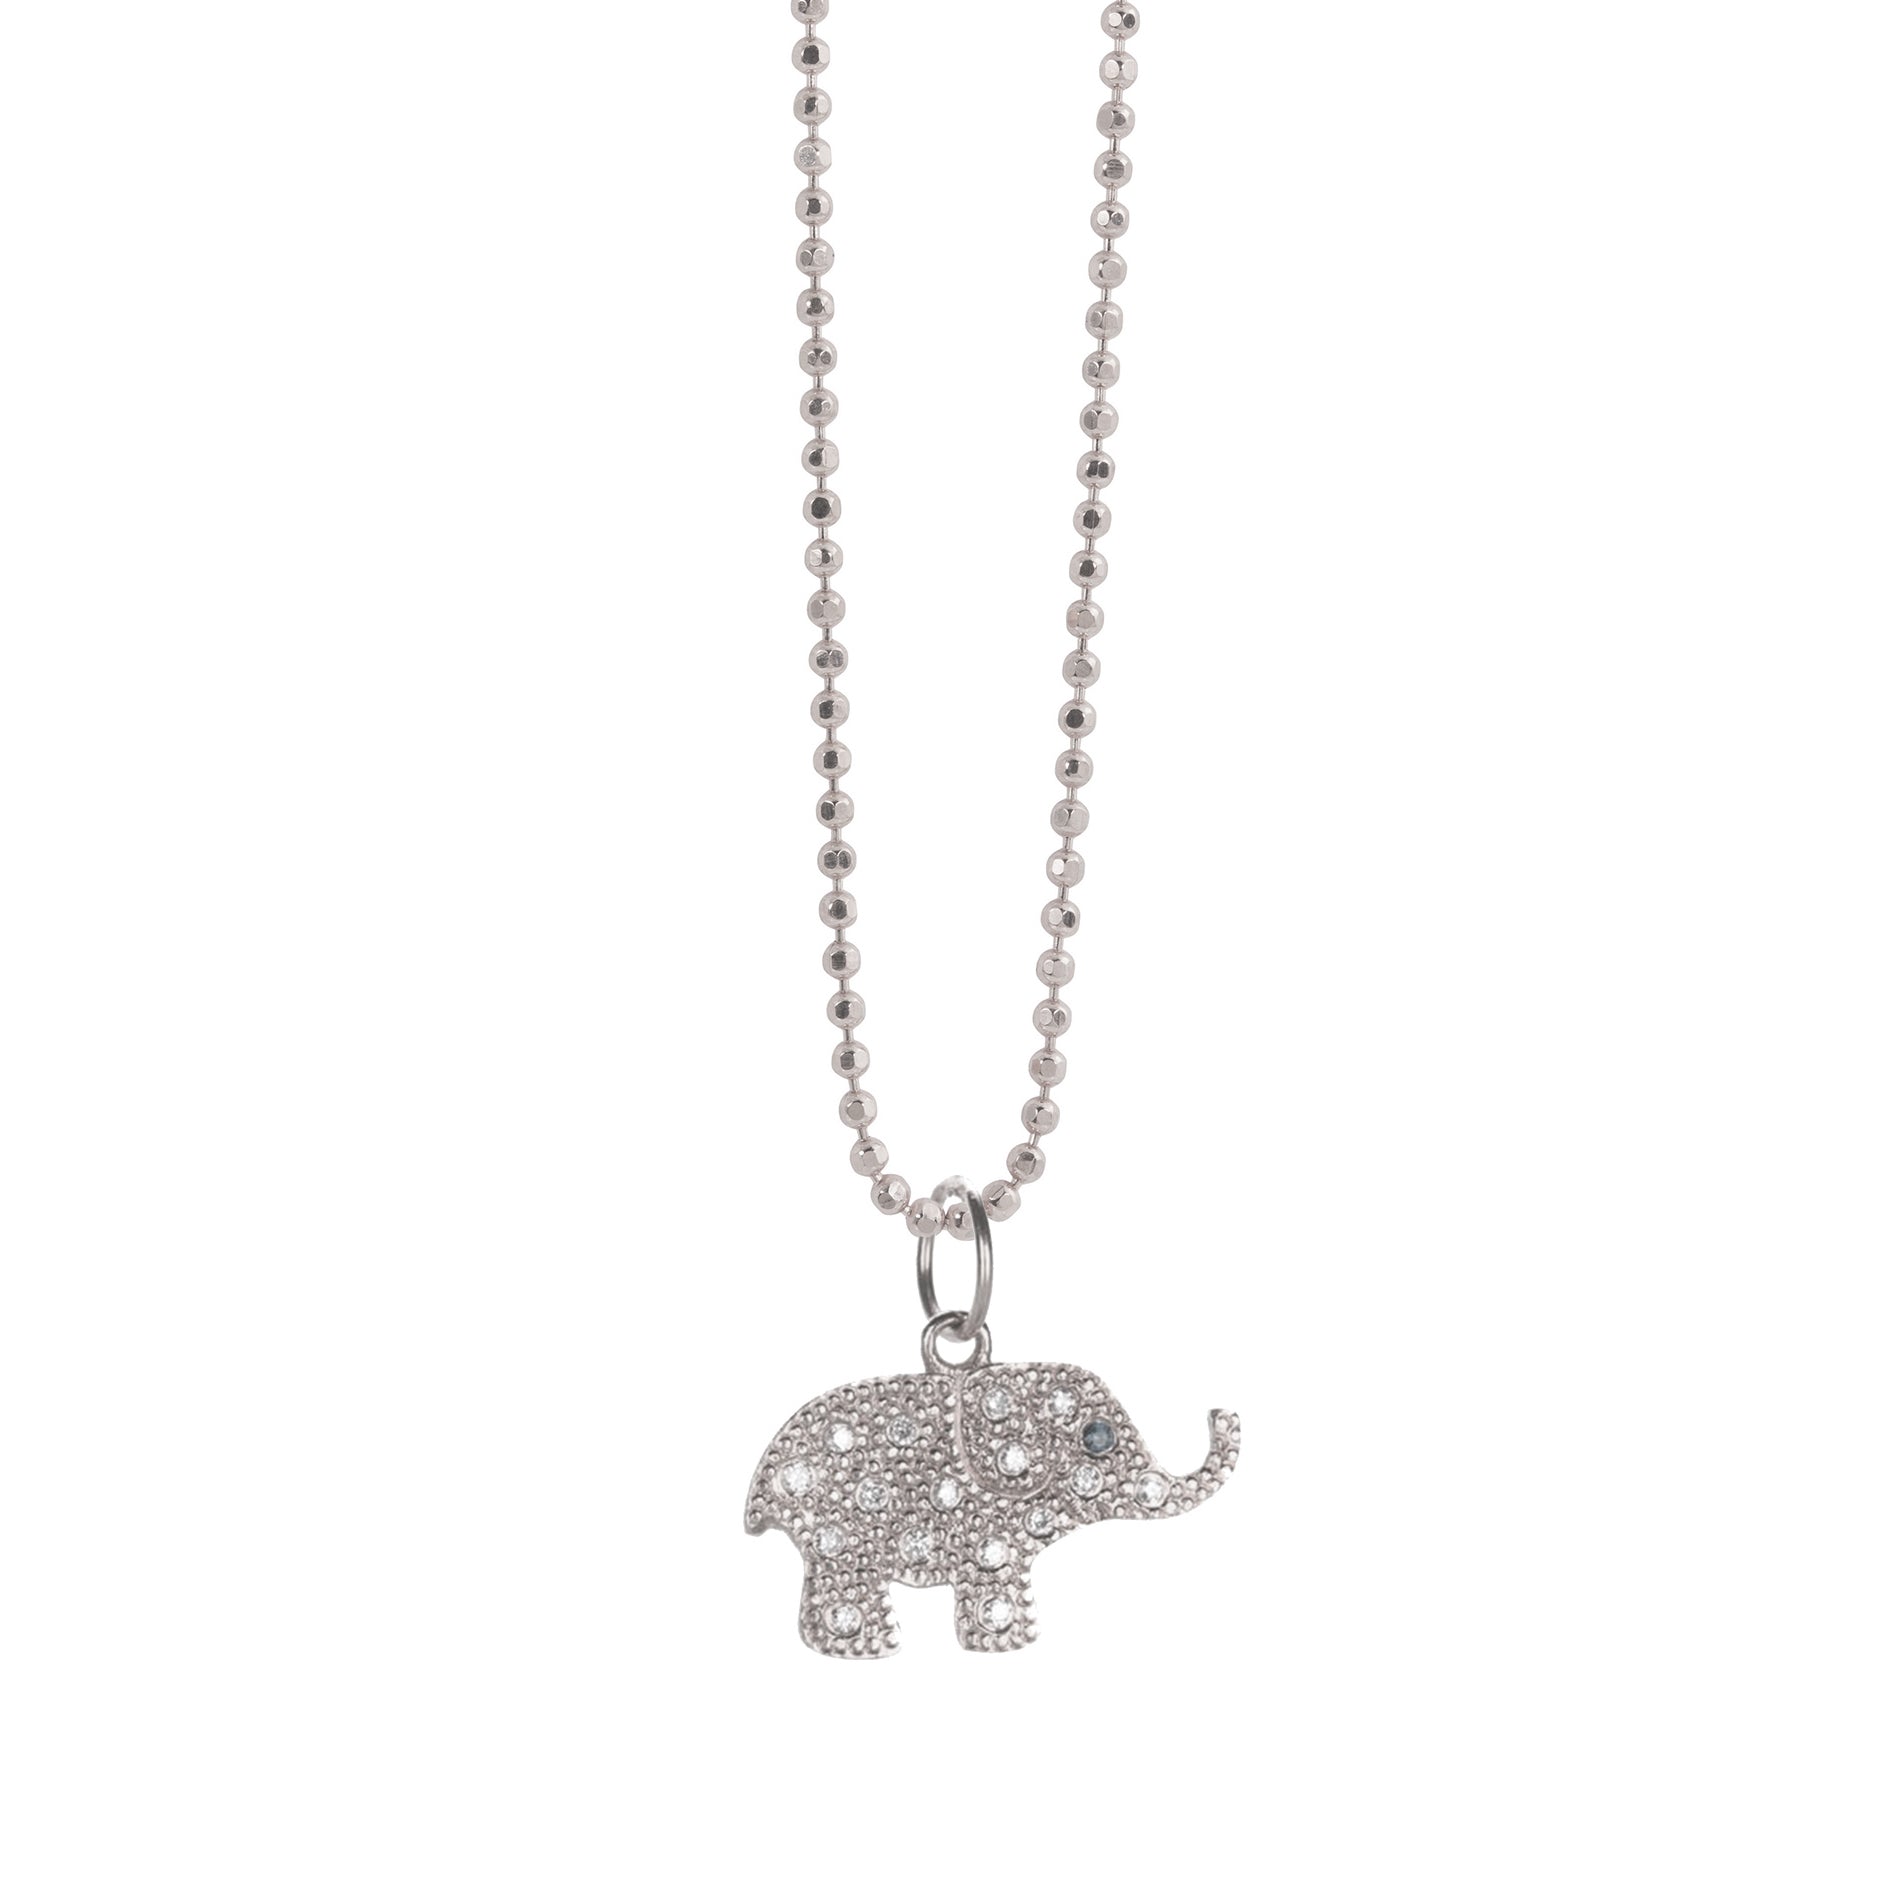 14k white gold baby ELLI elephant charm with scattered diamonds and sapphire eye